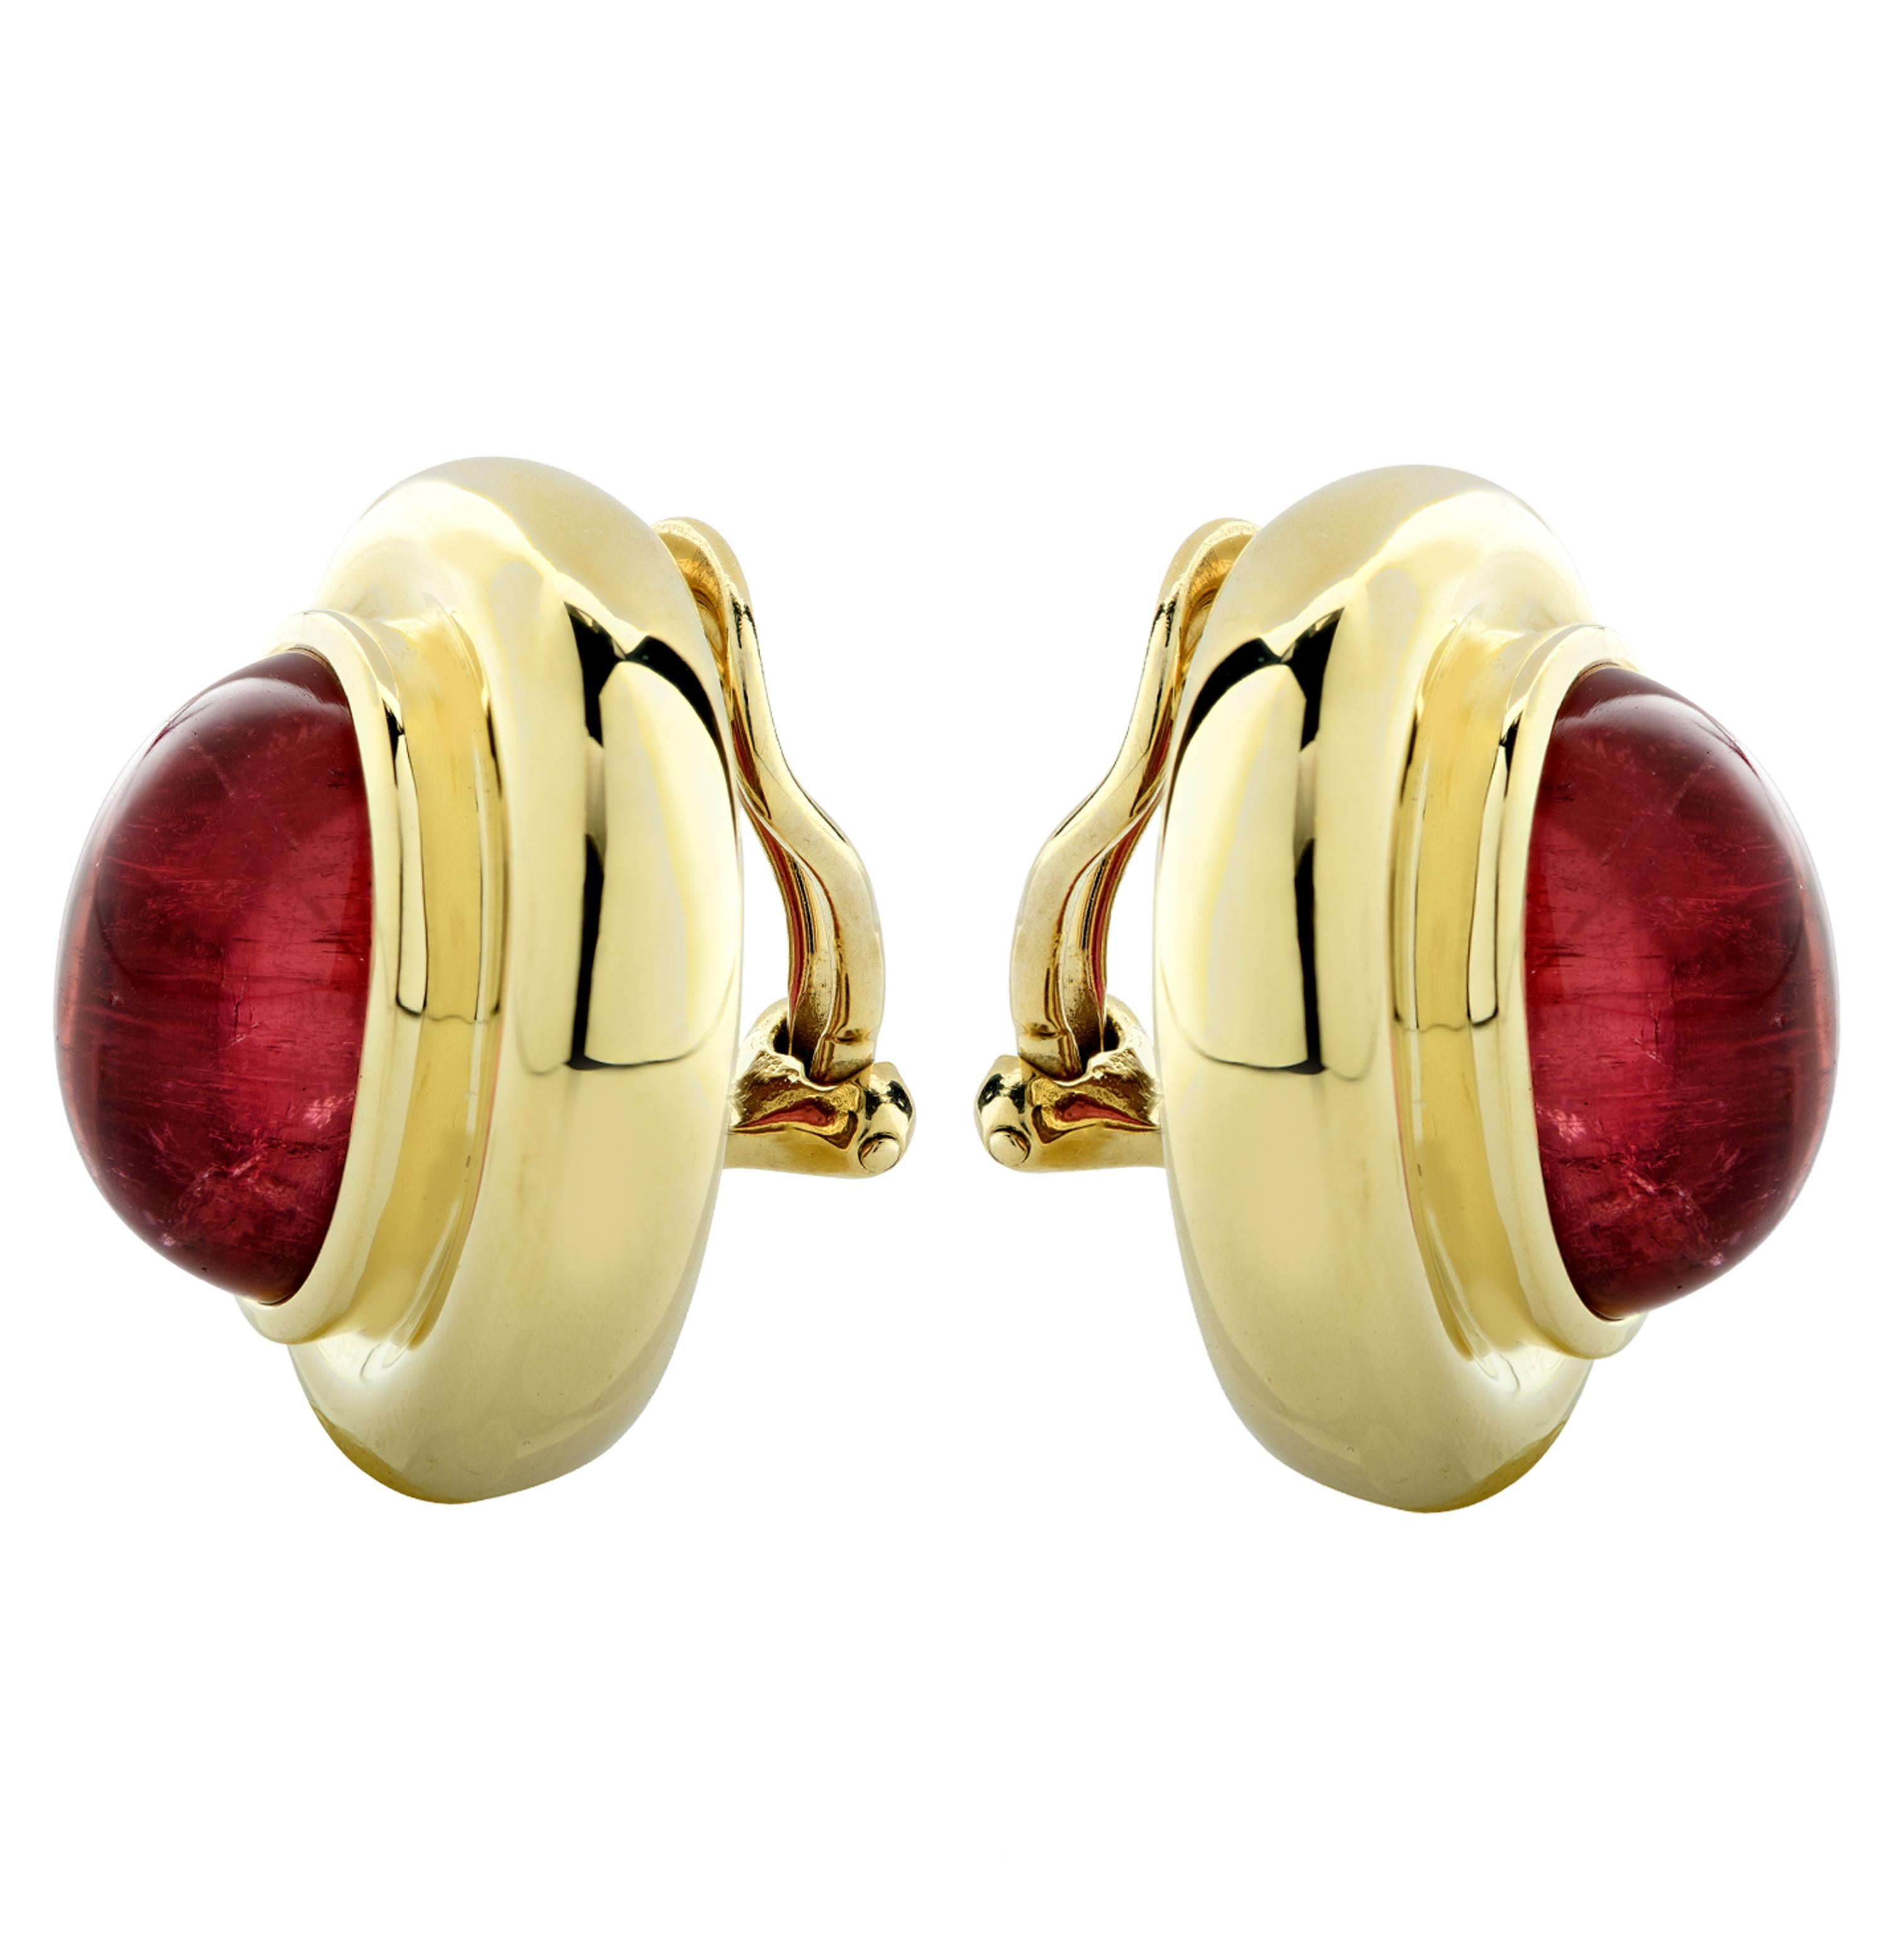 Striking Paloma Picasso Tiffany & Co. clip-on stud earrings crafted in 18 karat yellow gold, showcasing two oval cabochon Rubellite Tourmalines resting on a yellow gold bed. These stunning earrings measure 0.97 of an inch in length and 0.81 of an